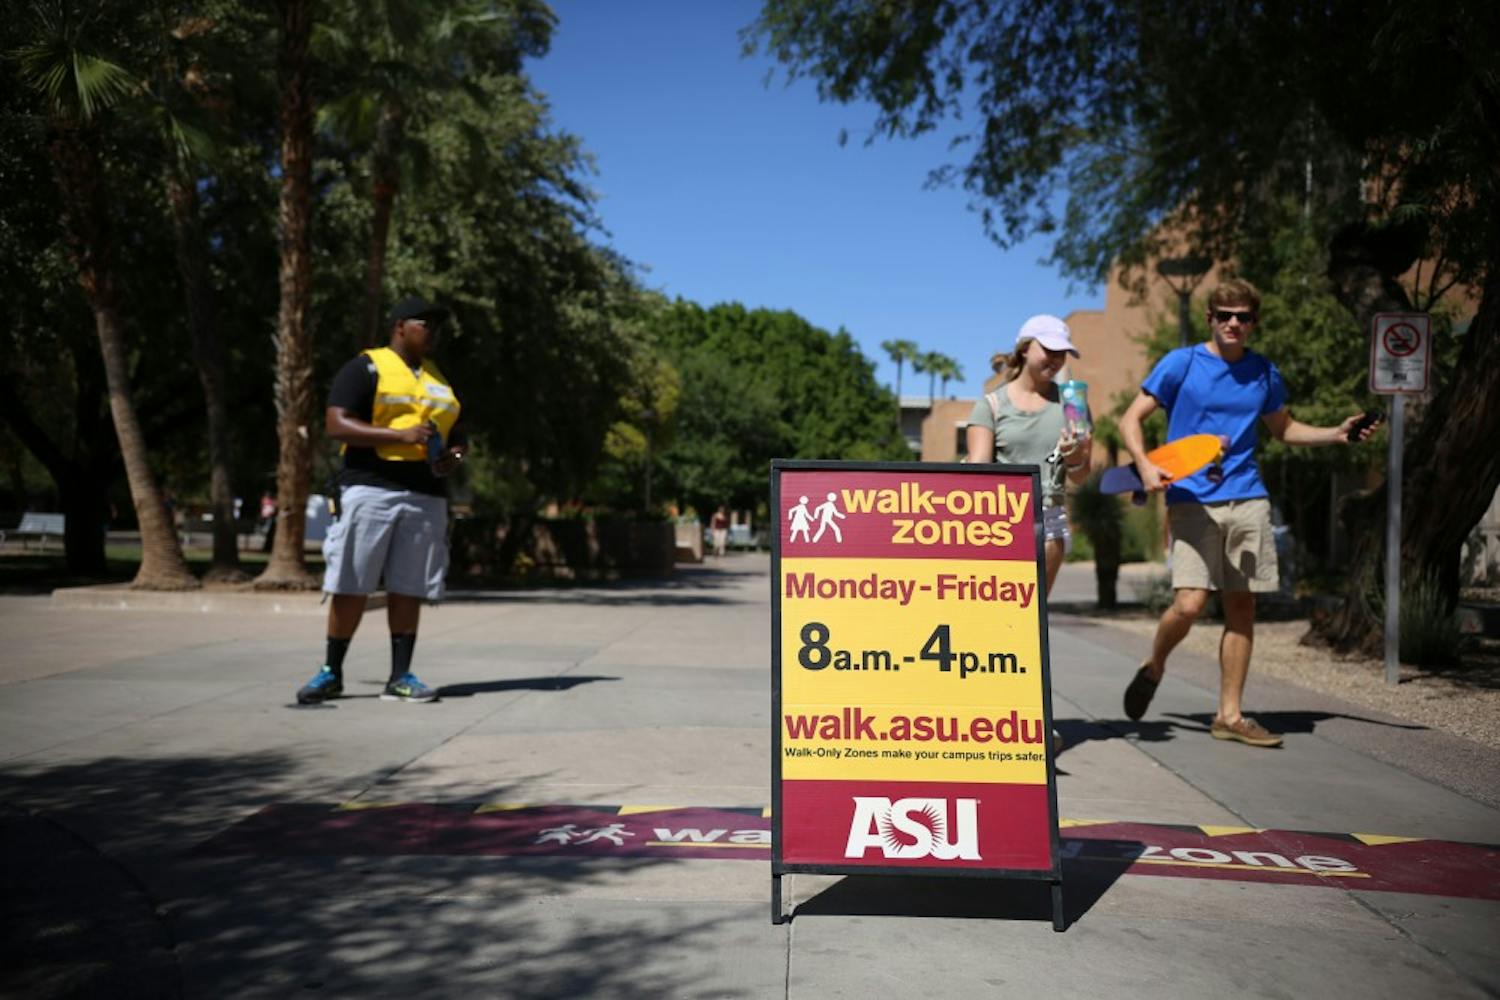 Passing students respecting the walk-only zones on Saturday, Sep. 16, 2016, on the ASU campus in Tempe, Arizona.